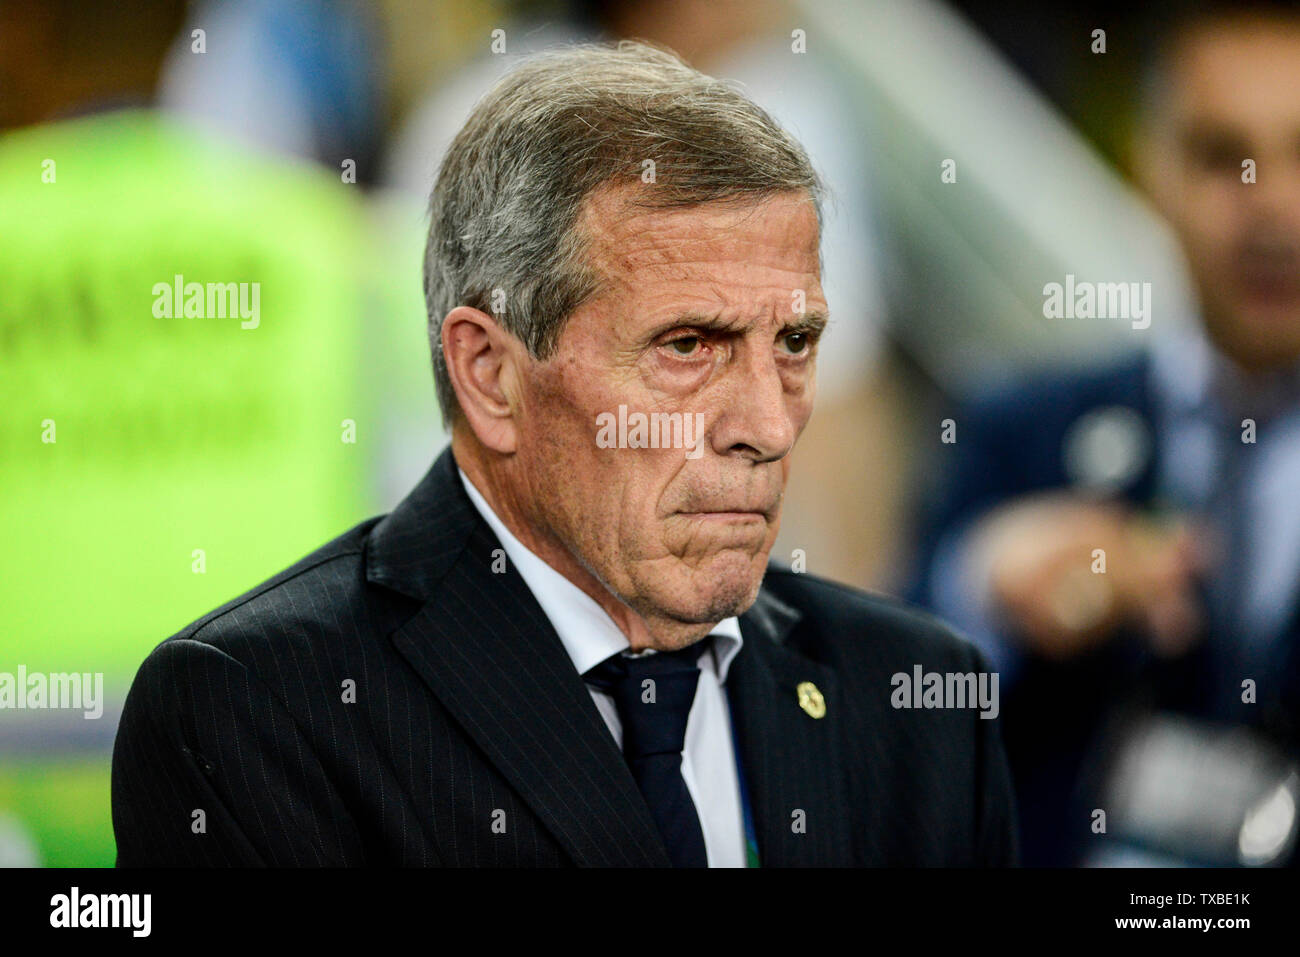 Rio De Janeiro, Brazil. 24th June, 2019. Coach Oscar Tabarez during a match between Chile and Uruguay, valid for the group stage of the Copa America 2019, held this Monday (24) at the Maracanã Stadium in Rio de Janeiro, RJ. Credit: Celso Pupo/FotoArena/Alamy Live News Stock Photo